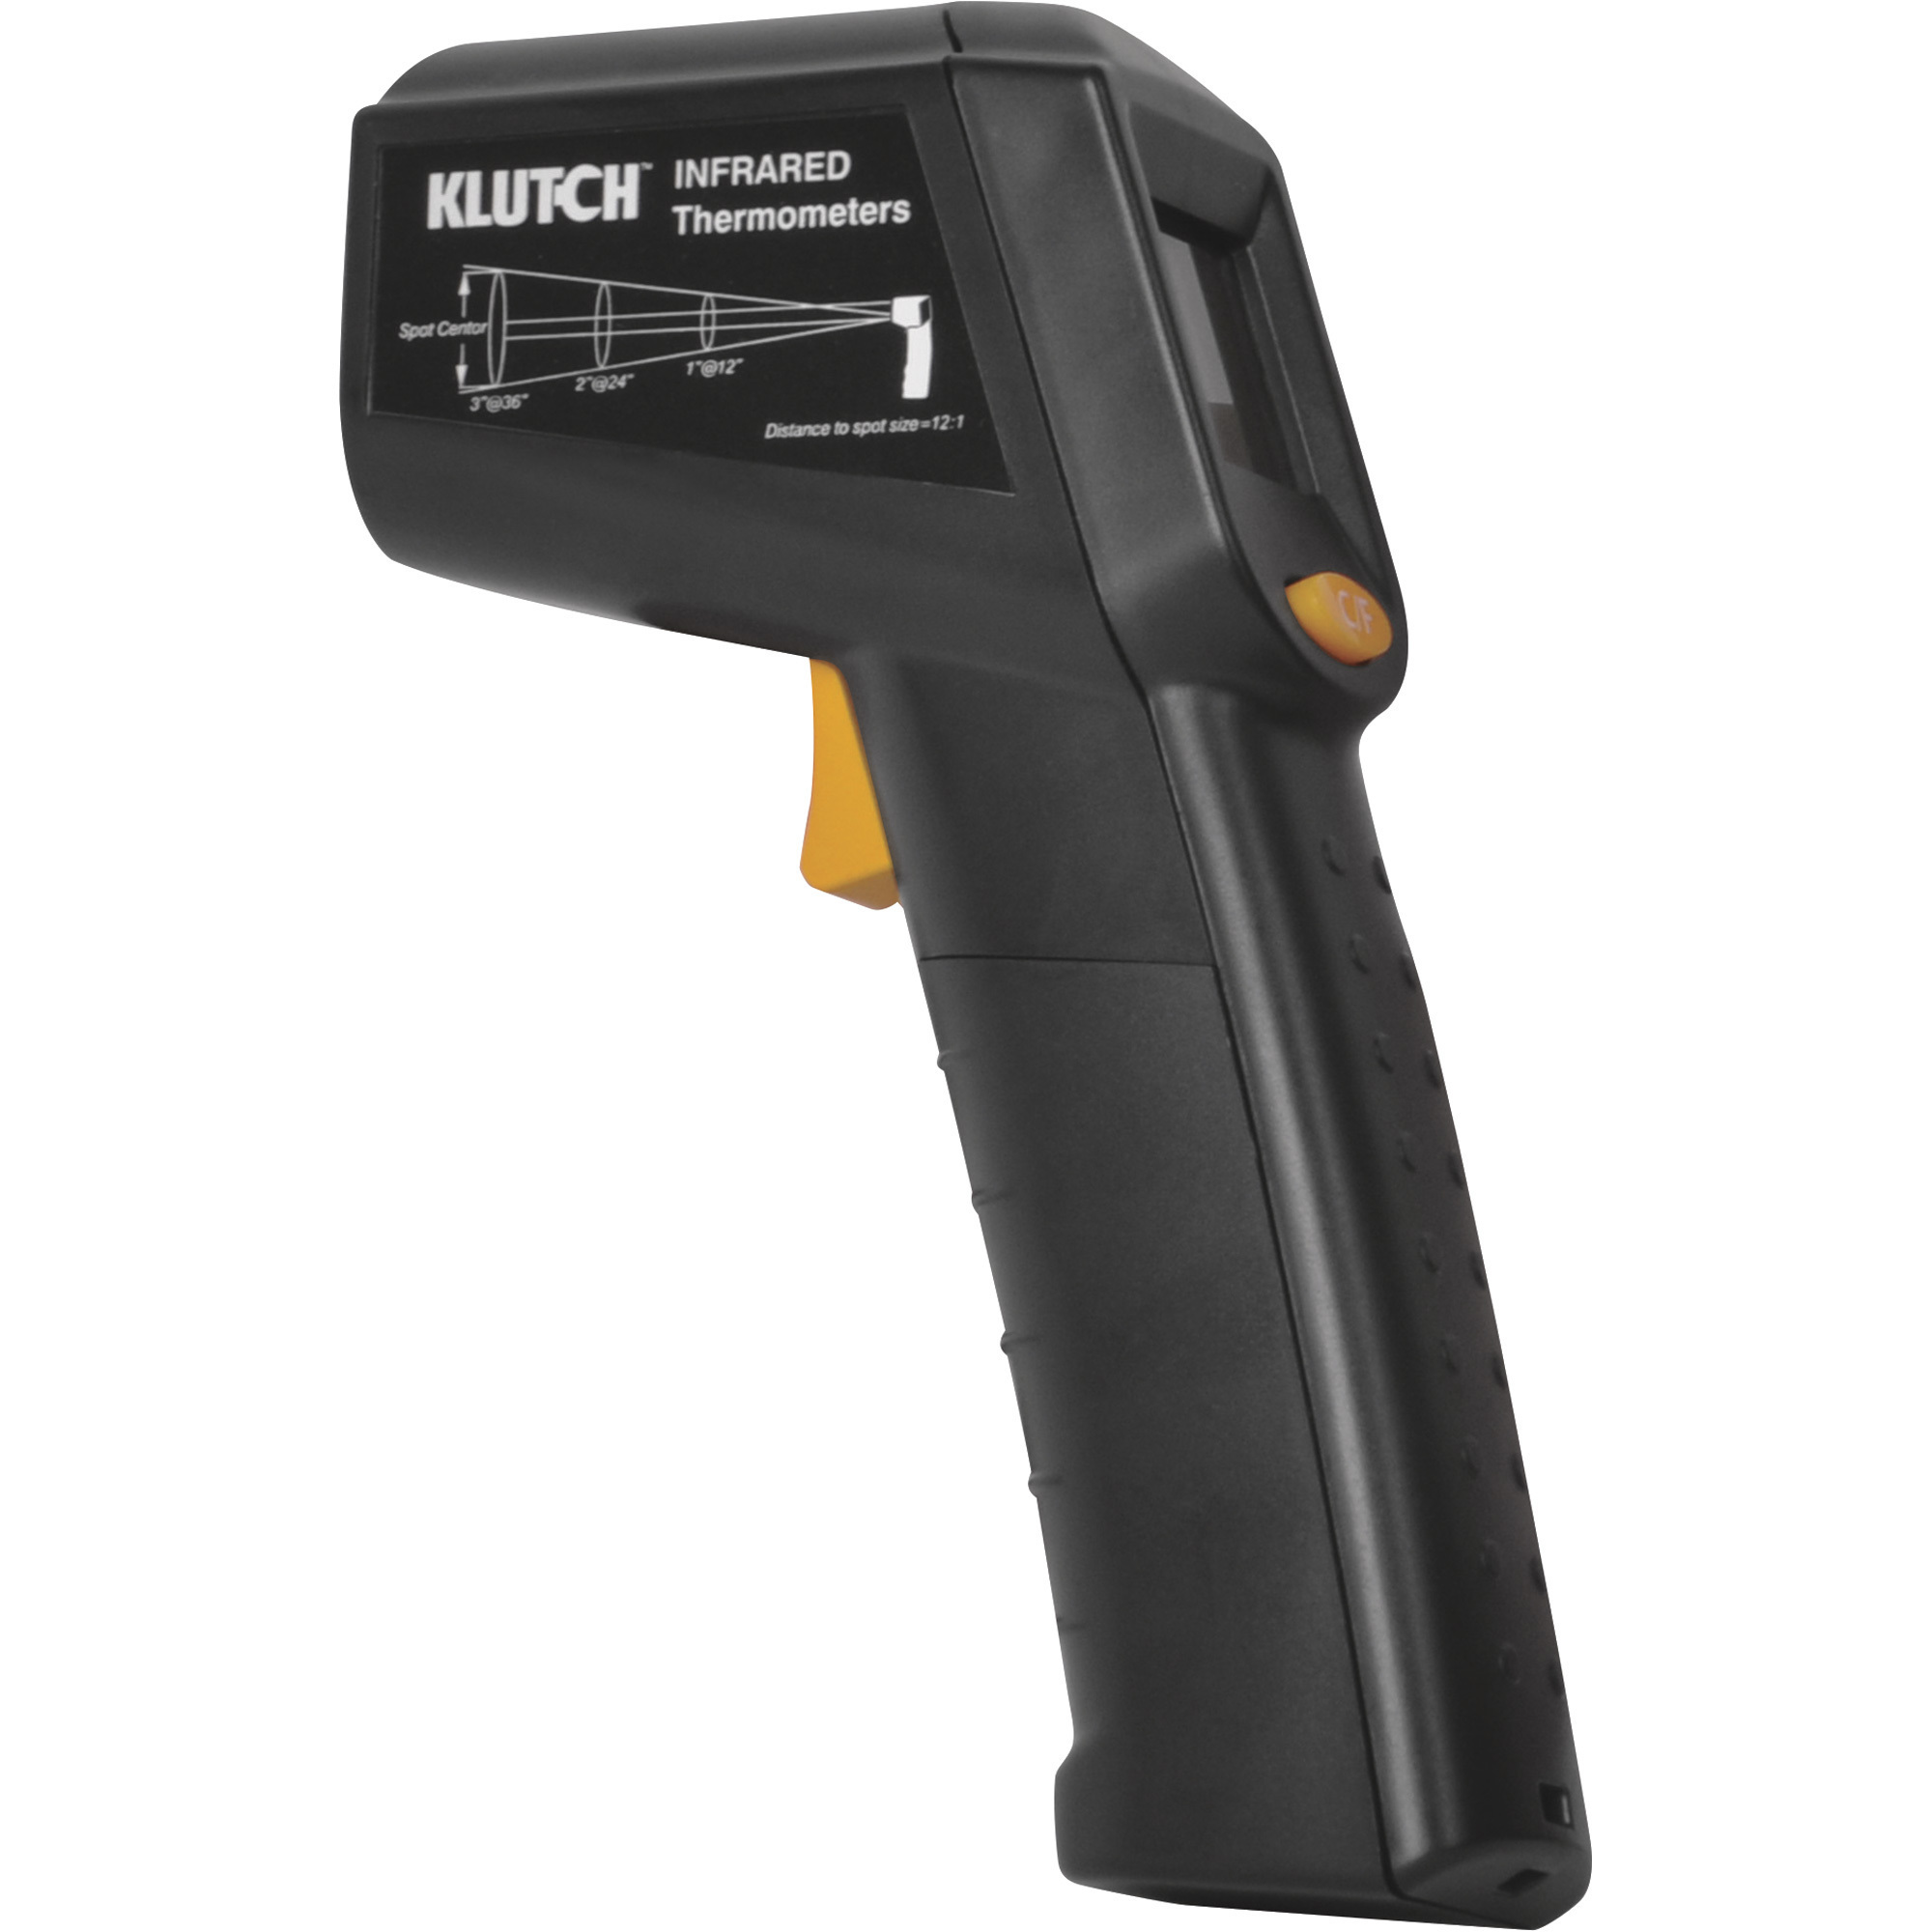 Klutch Non-Contact Digital Infrared Diagnostics Thermometer, 12:1 Distance-to-Sight Ratio